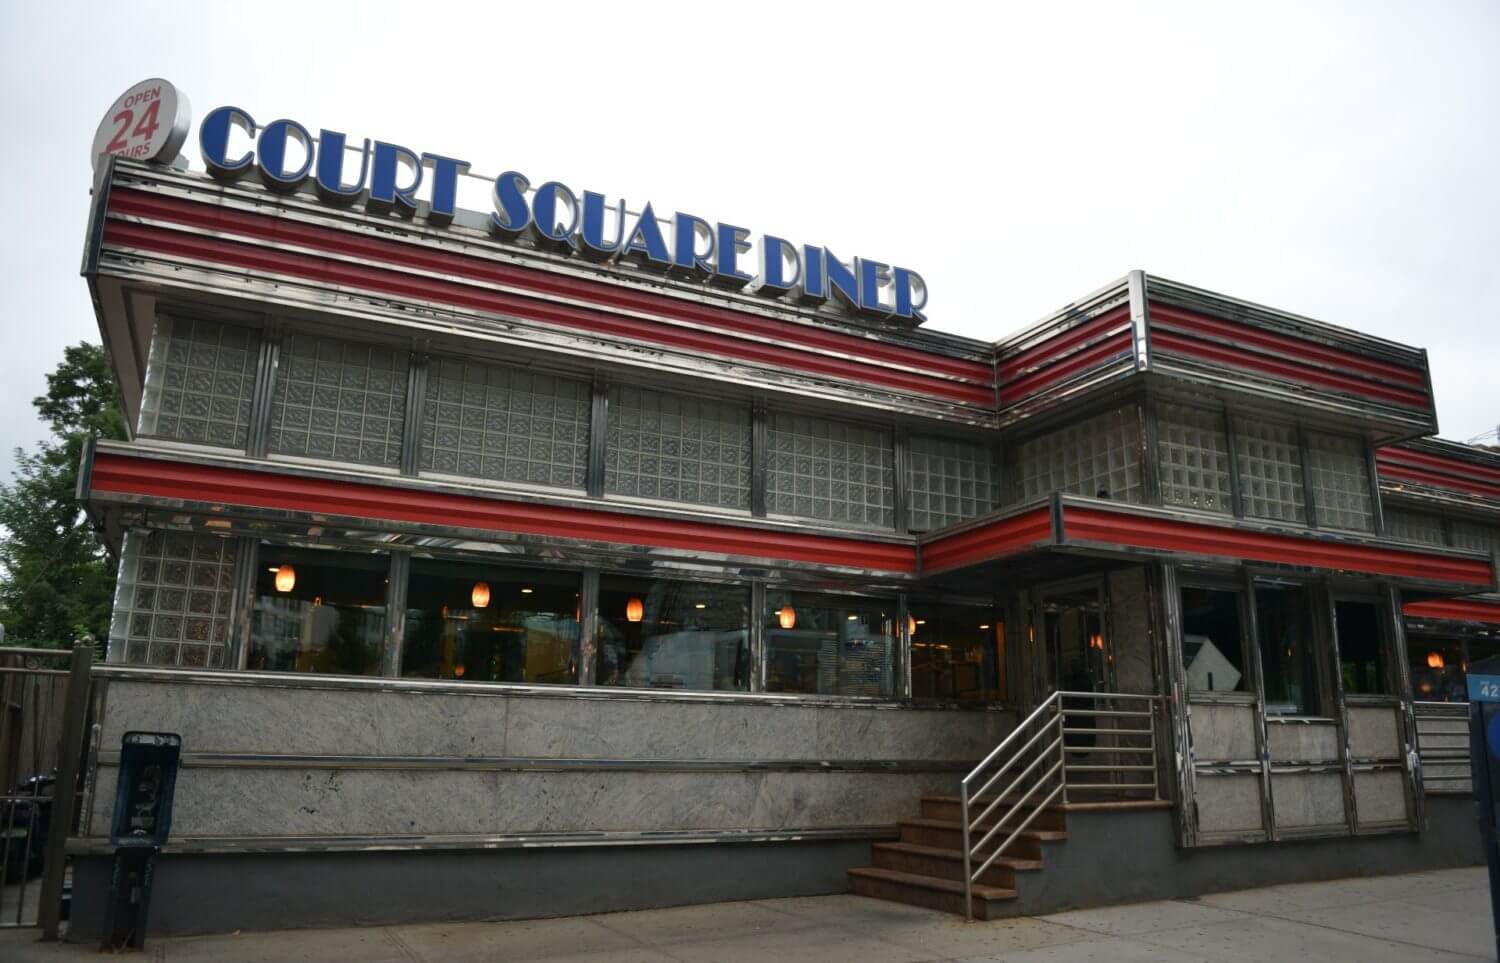 Court Square Diner - Photo credit: Fantrippers